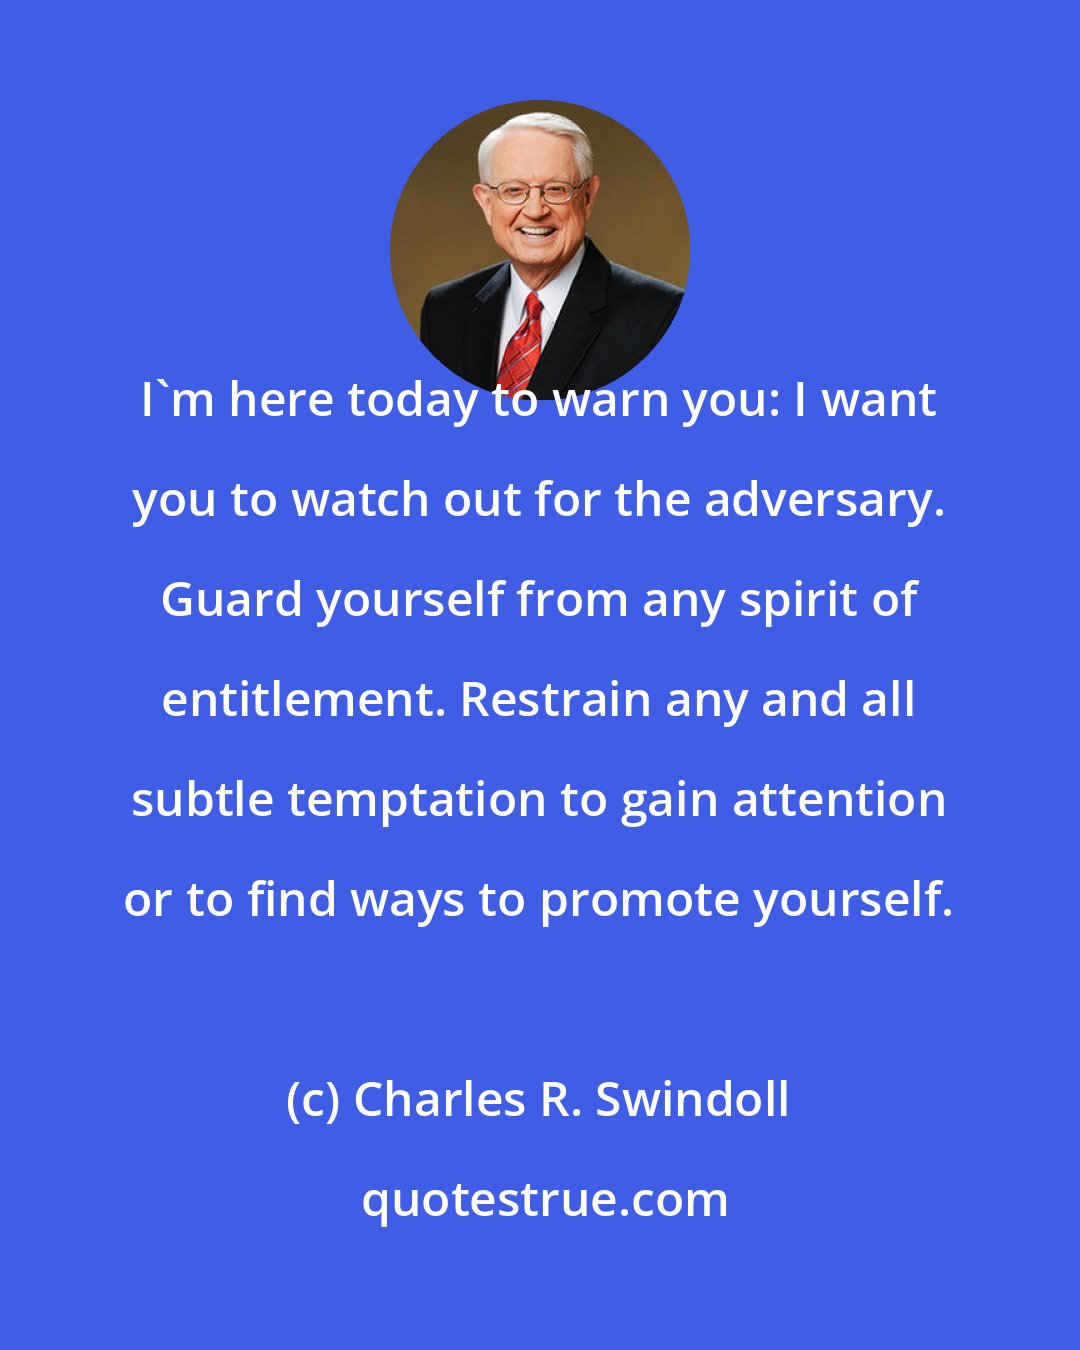 Charles R. Swindoll: I'm here today to warn you: I want you to watch out for the adversary. Guard yourself from any spirit of entitlement. Restrain any and all subtle temptation to gain attention or to find ways to promote yourself.